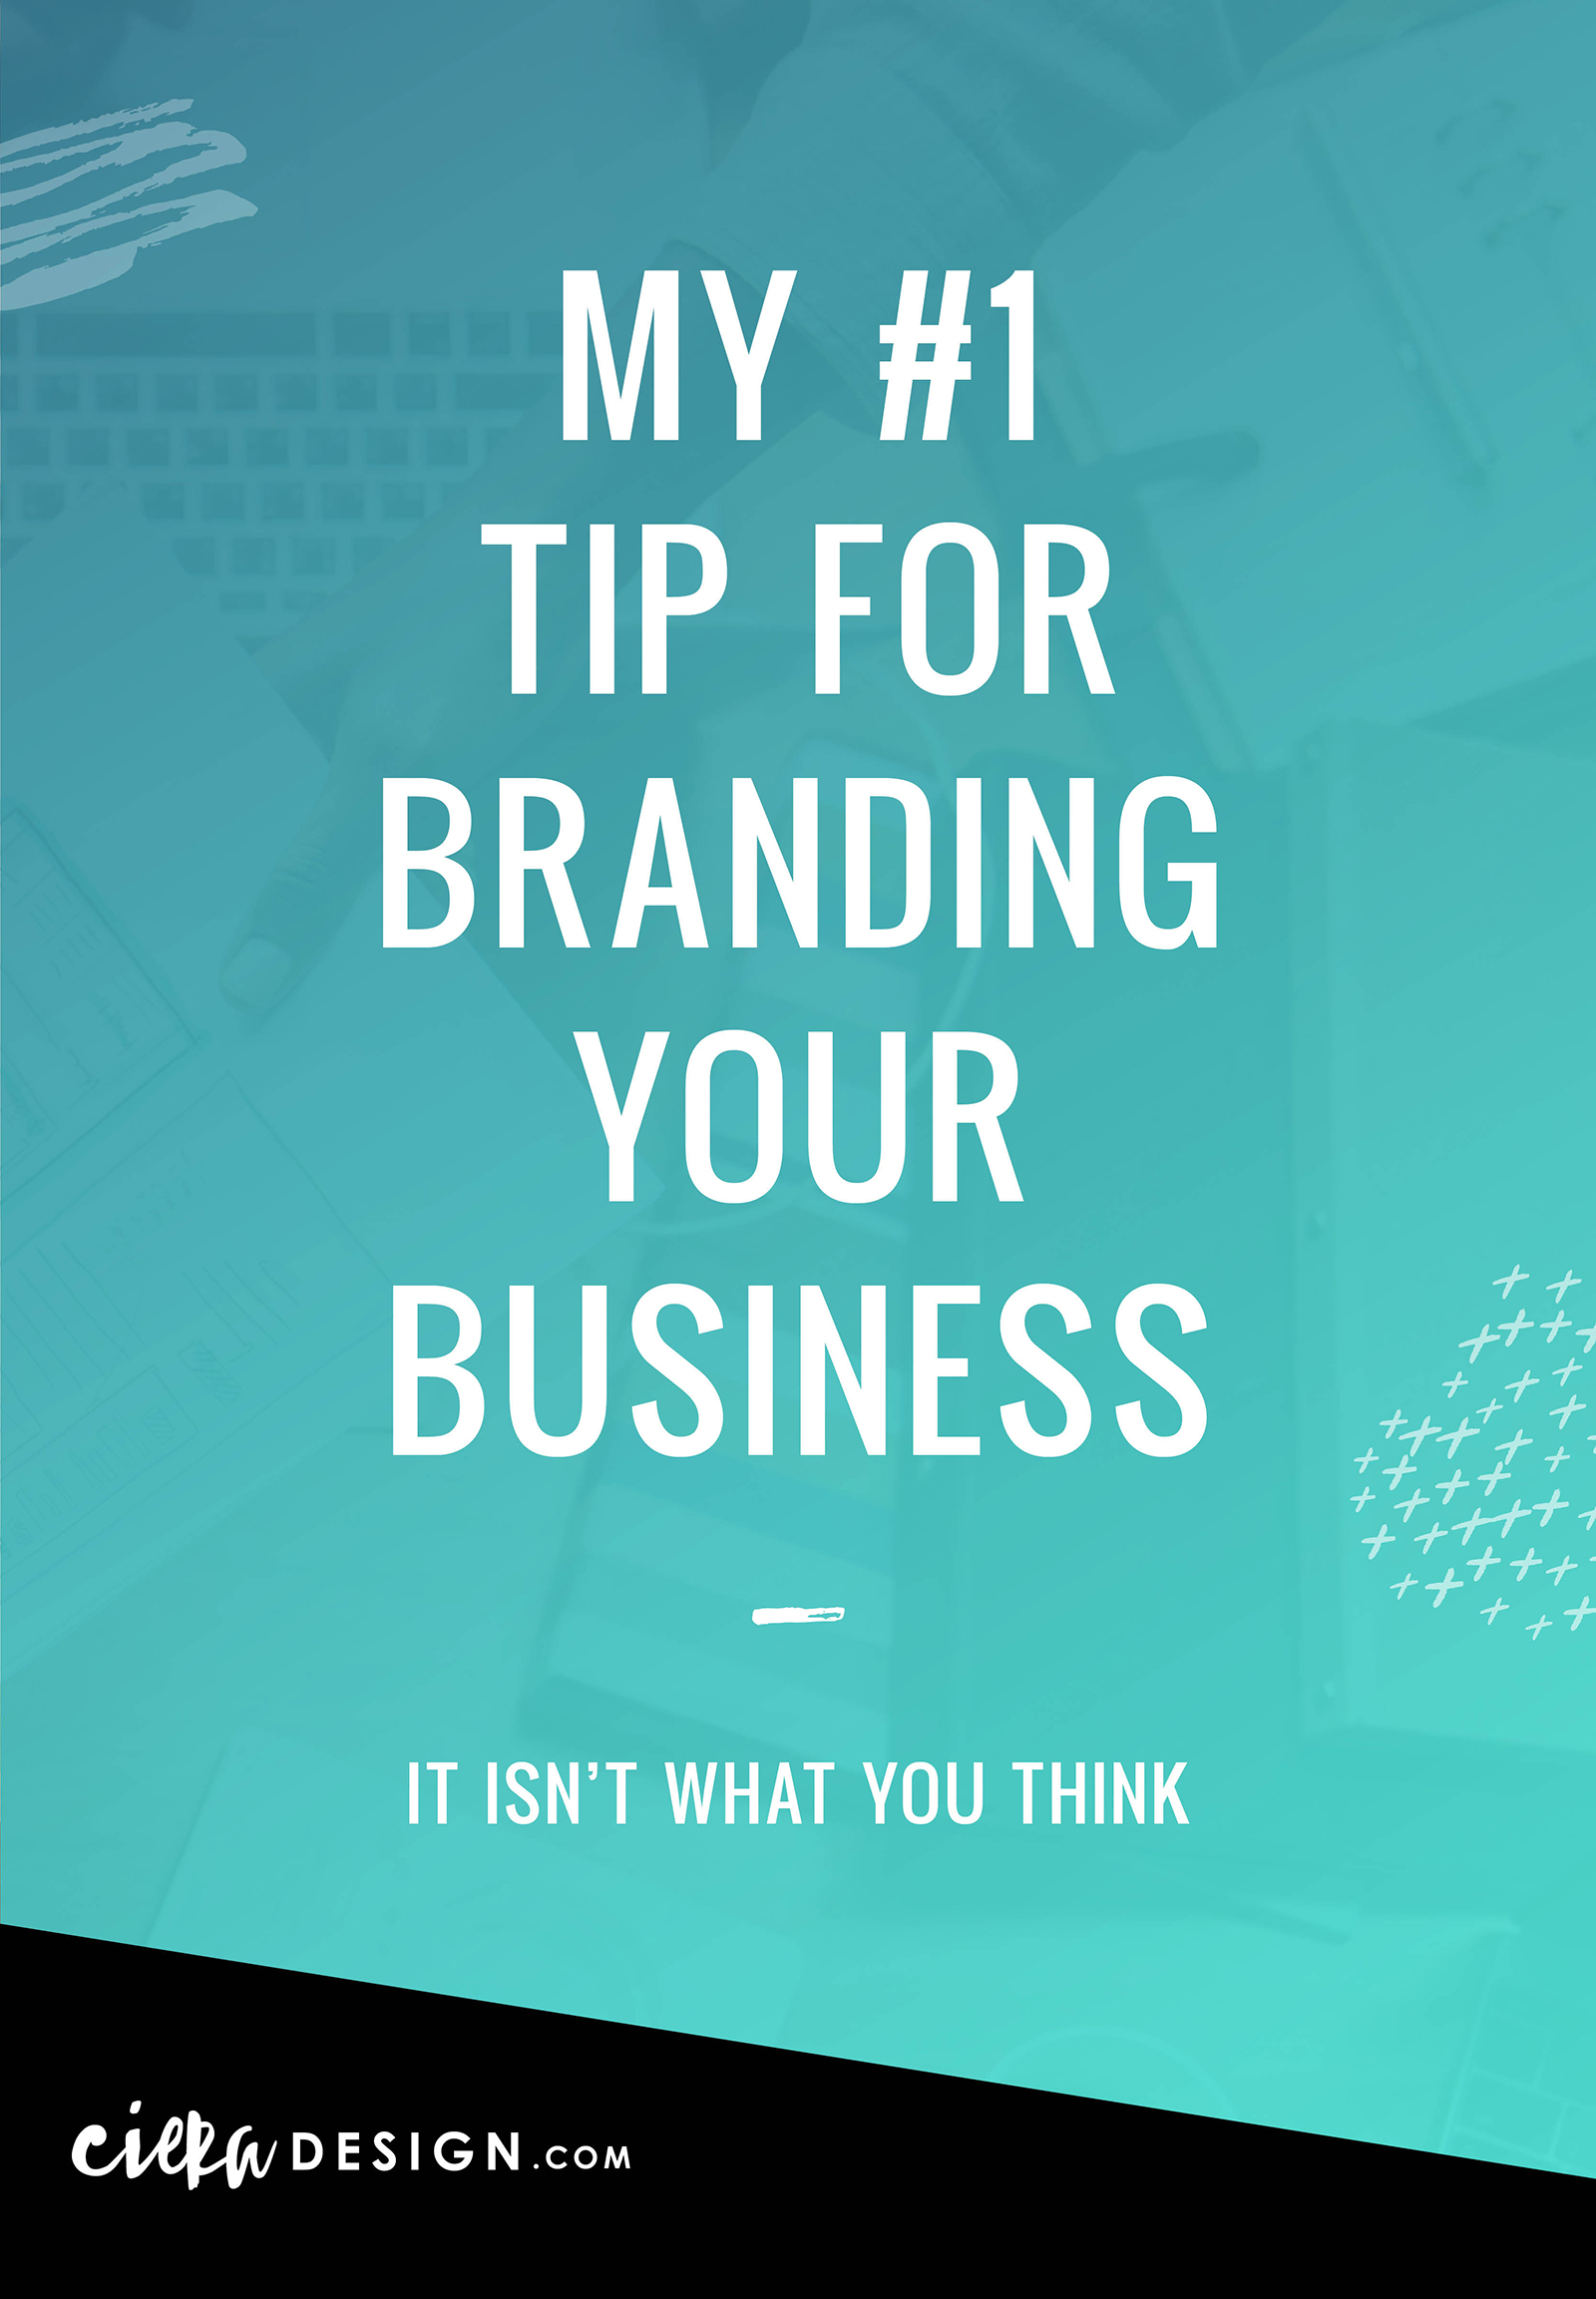 I was recently asked, "What is your best tip for branding a business?" And you may be surprised that my answer was not "hire a designer to create an amazing logo" or wasn't really design related at all...⠀